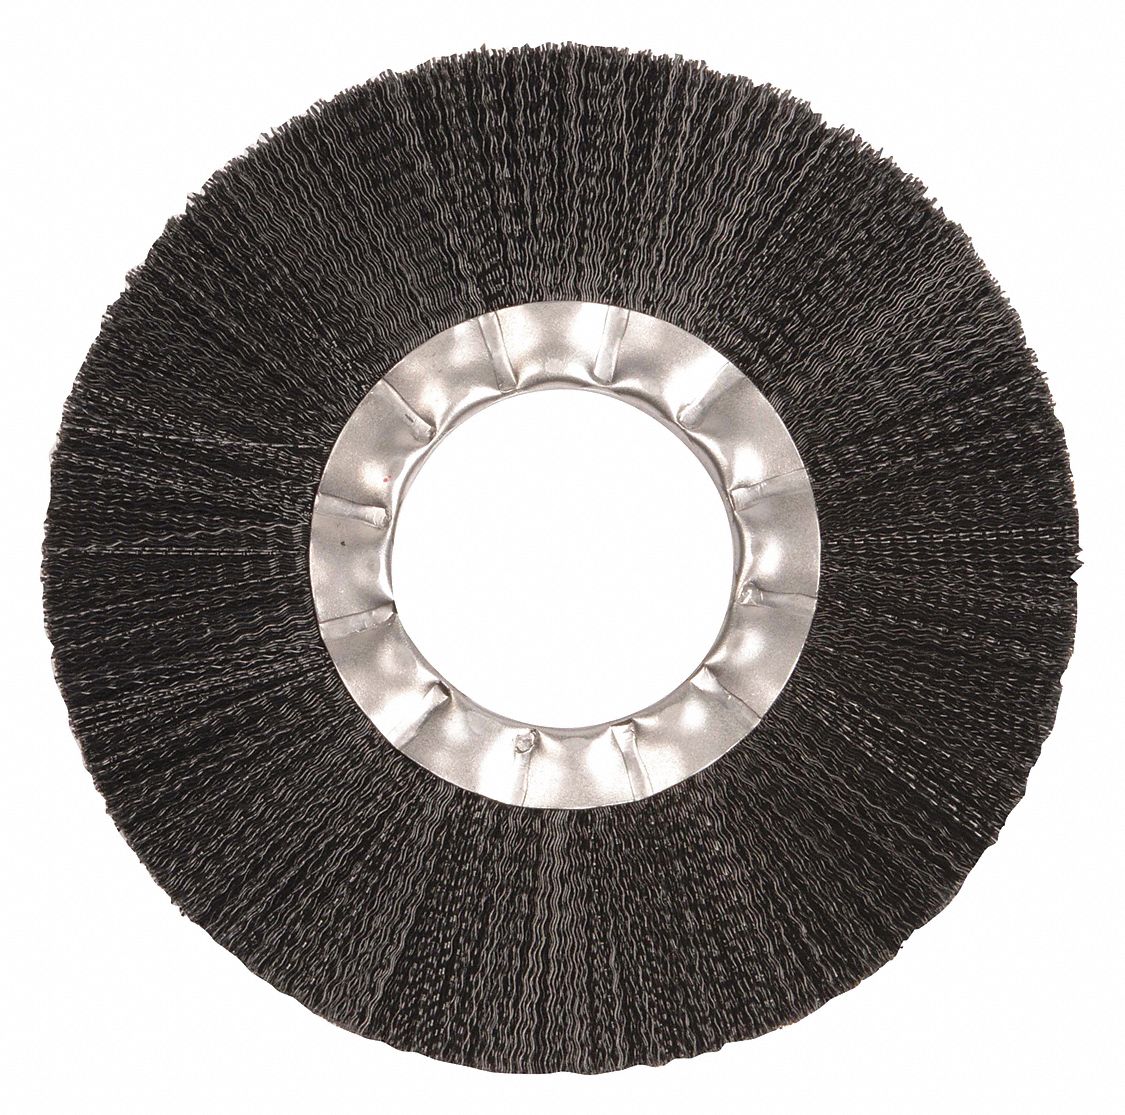 38P537 - 6In. Nylon Wheel .016 2In. A.H.(Nwa-6) - Only Shipped in Quantities of 2